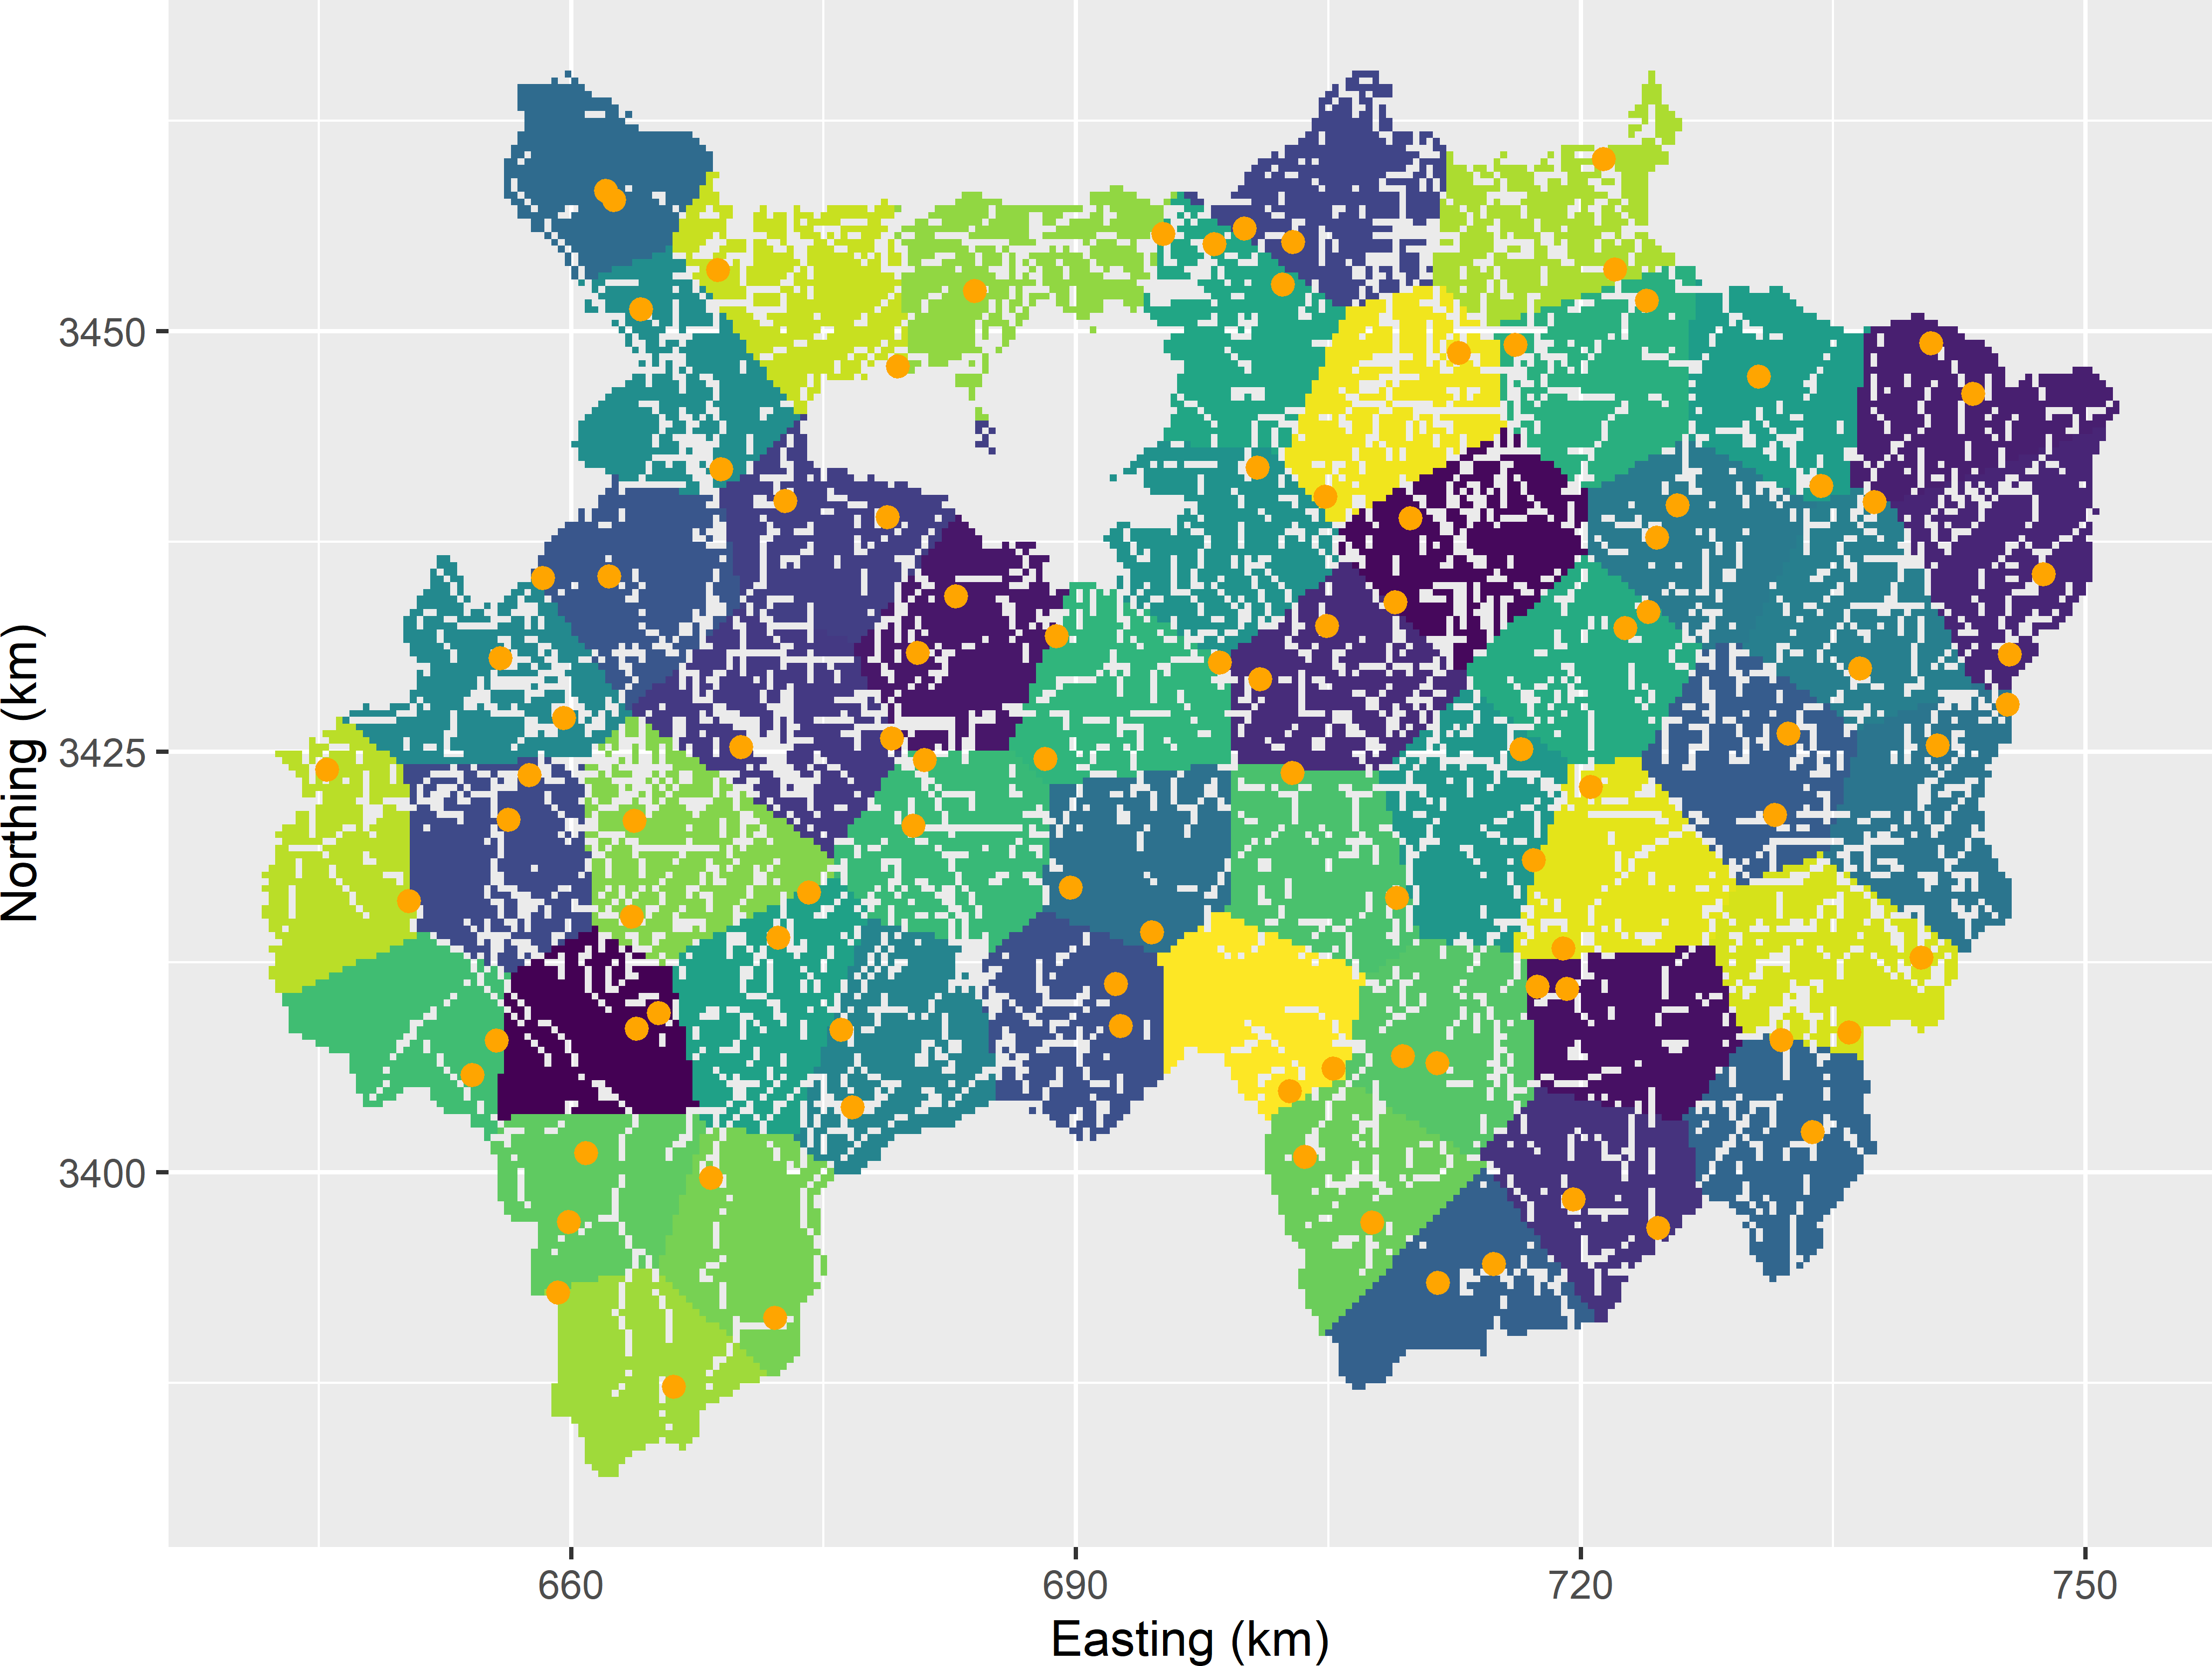 Compact geostrata of equal size for Xuancheng and stratified simple random sample of two points per stratum.